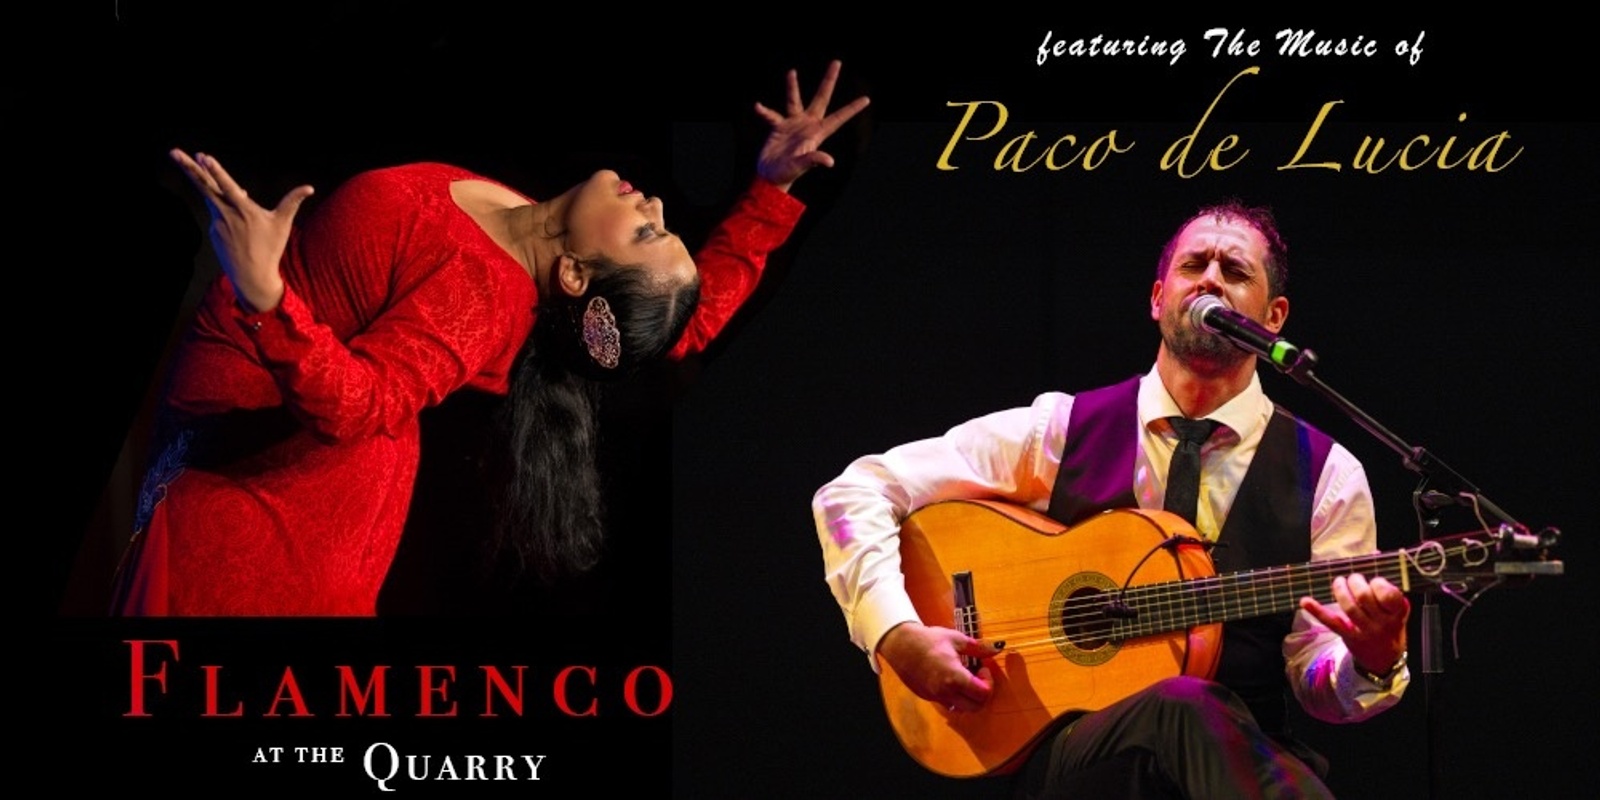 Banner image for Flamenco at the Quarry - featuring the Music of Paco de Lucía